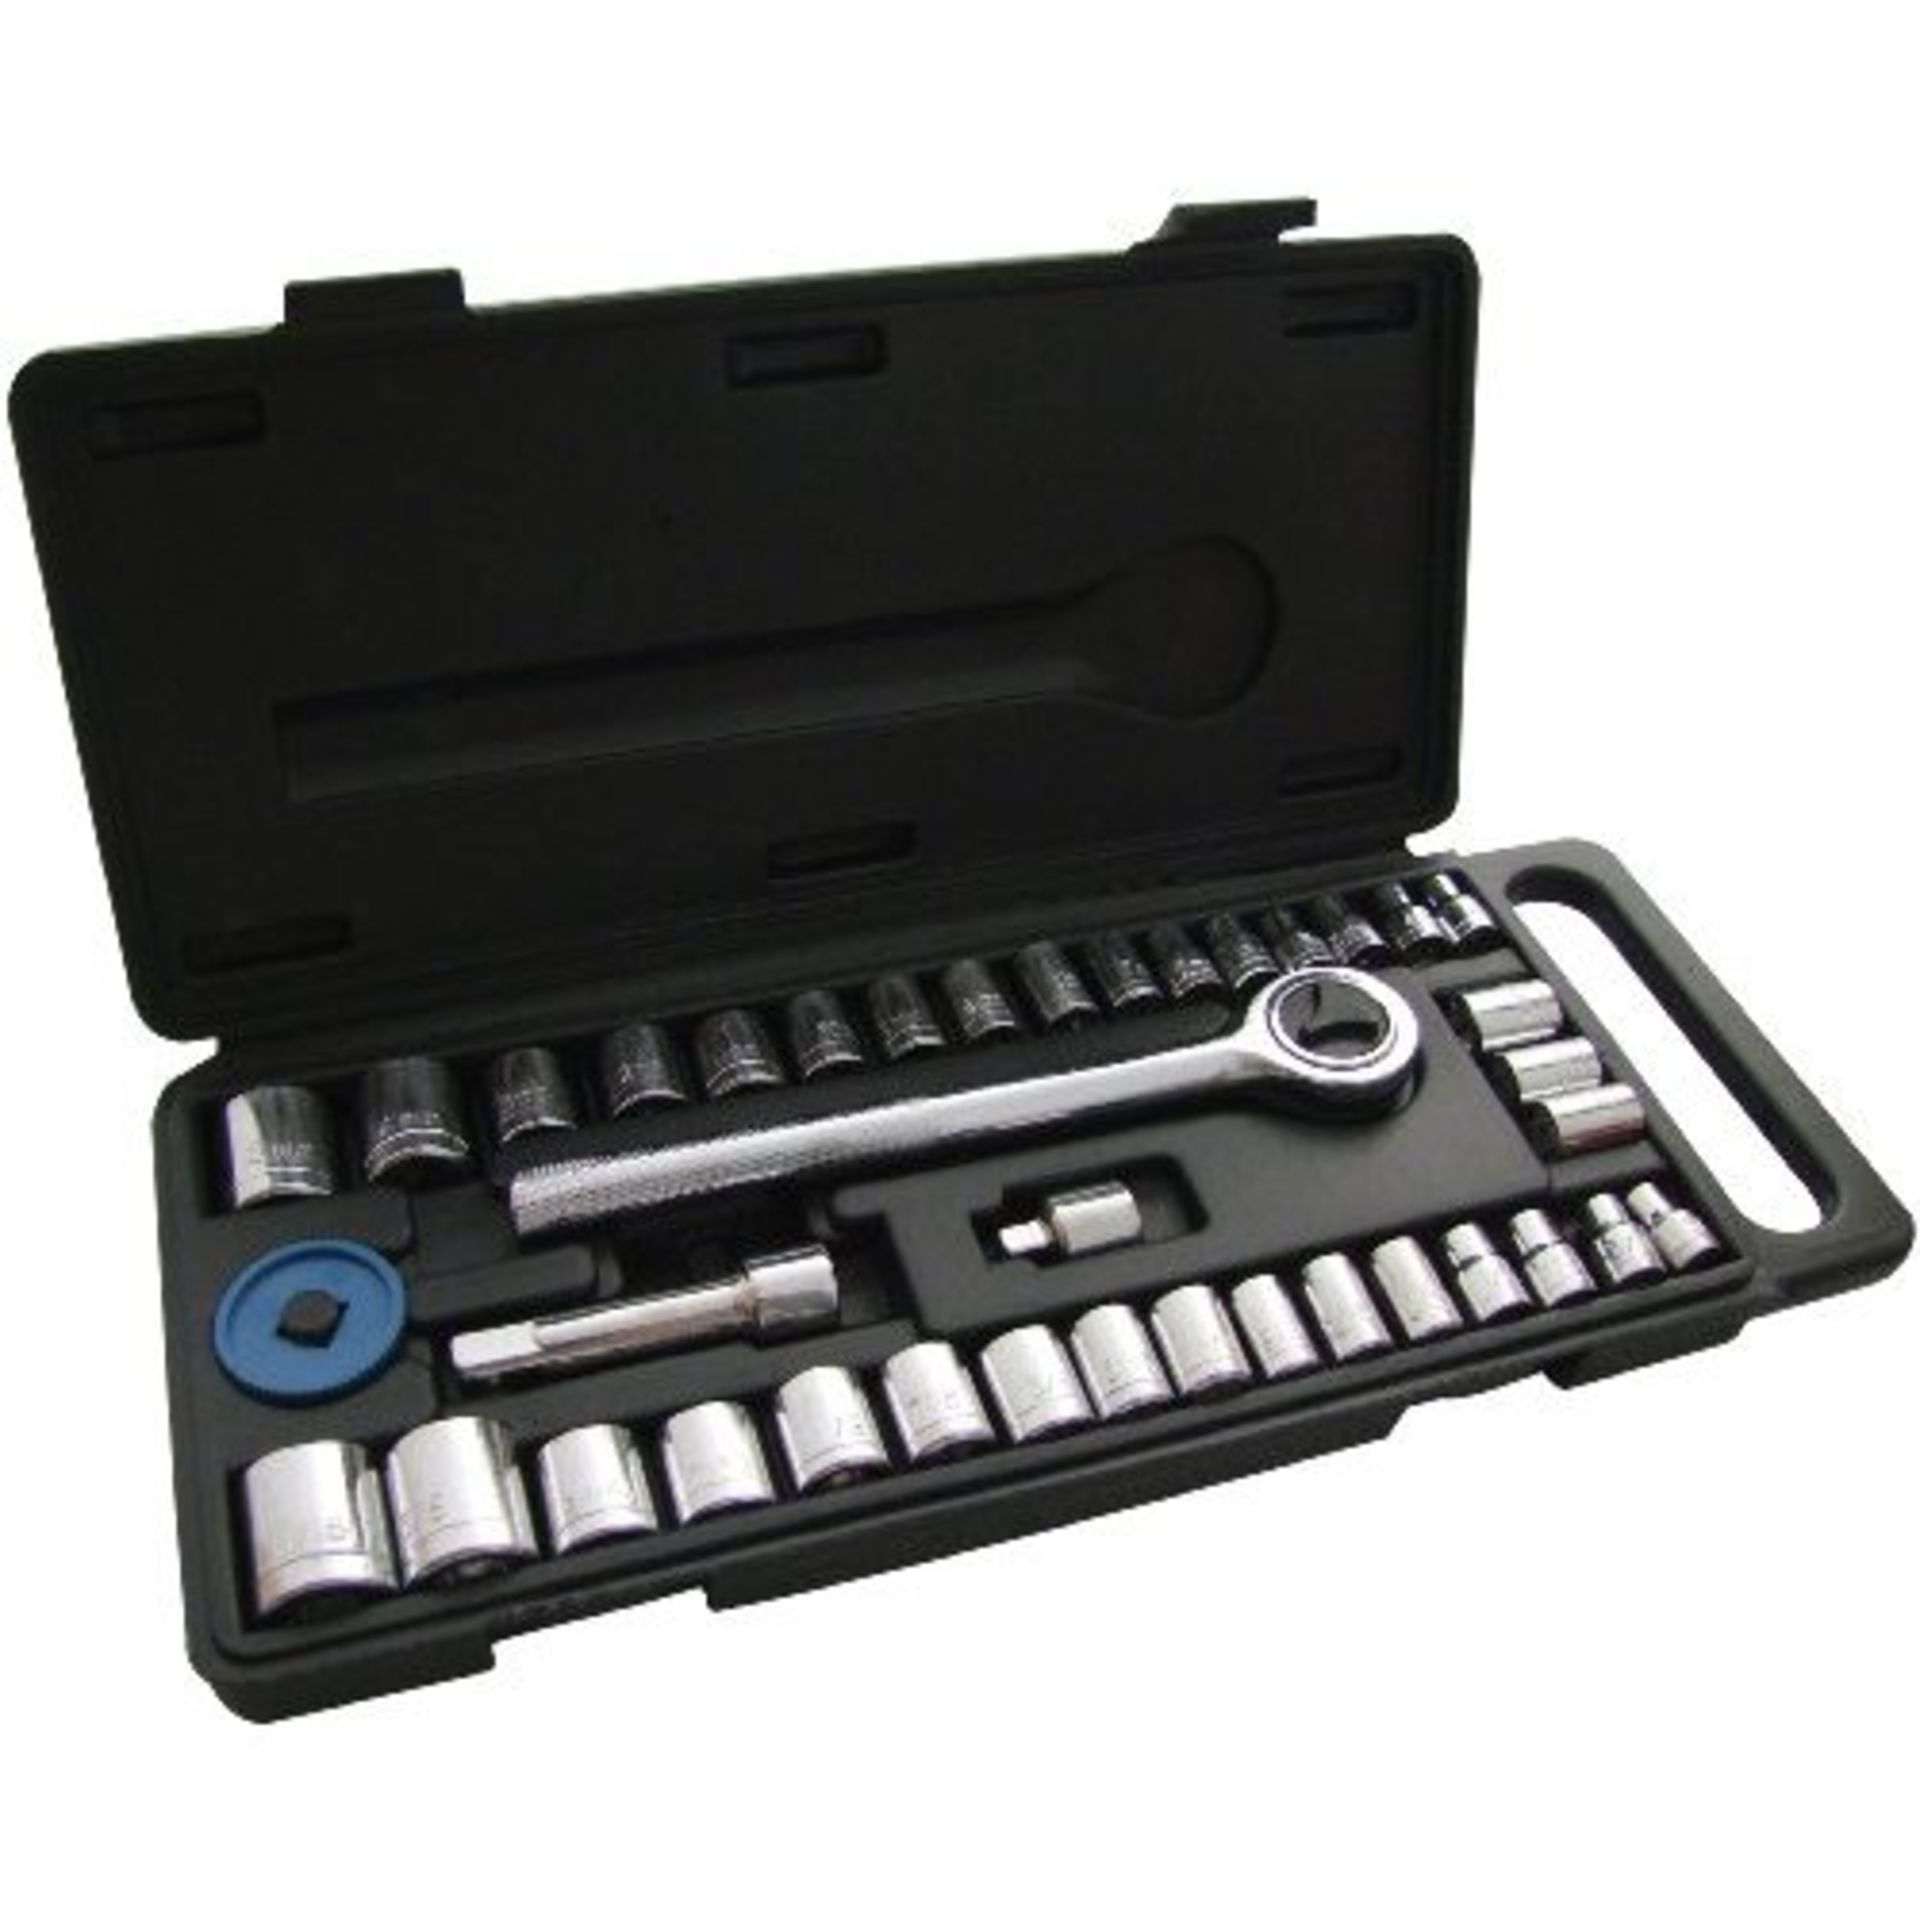 V *TRADE QTY* Brand New 40 Piece 1/4" and 3/8" Drive Chrome Plated Socket Set X 5 YOUR BID PRICE